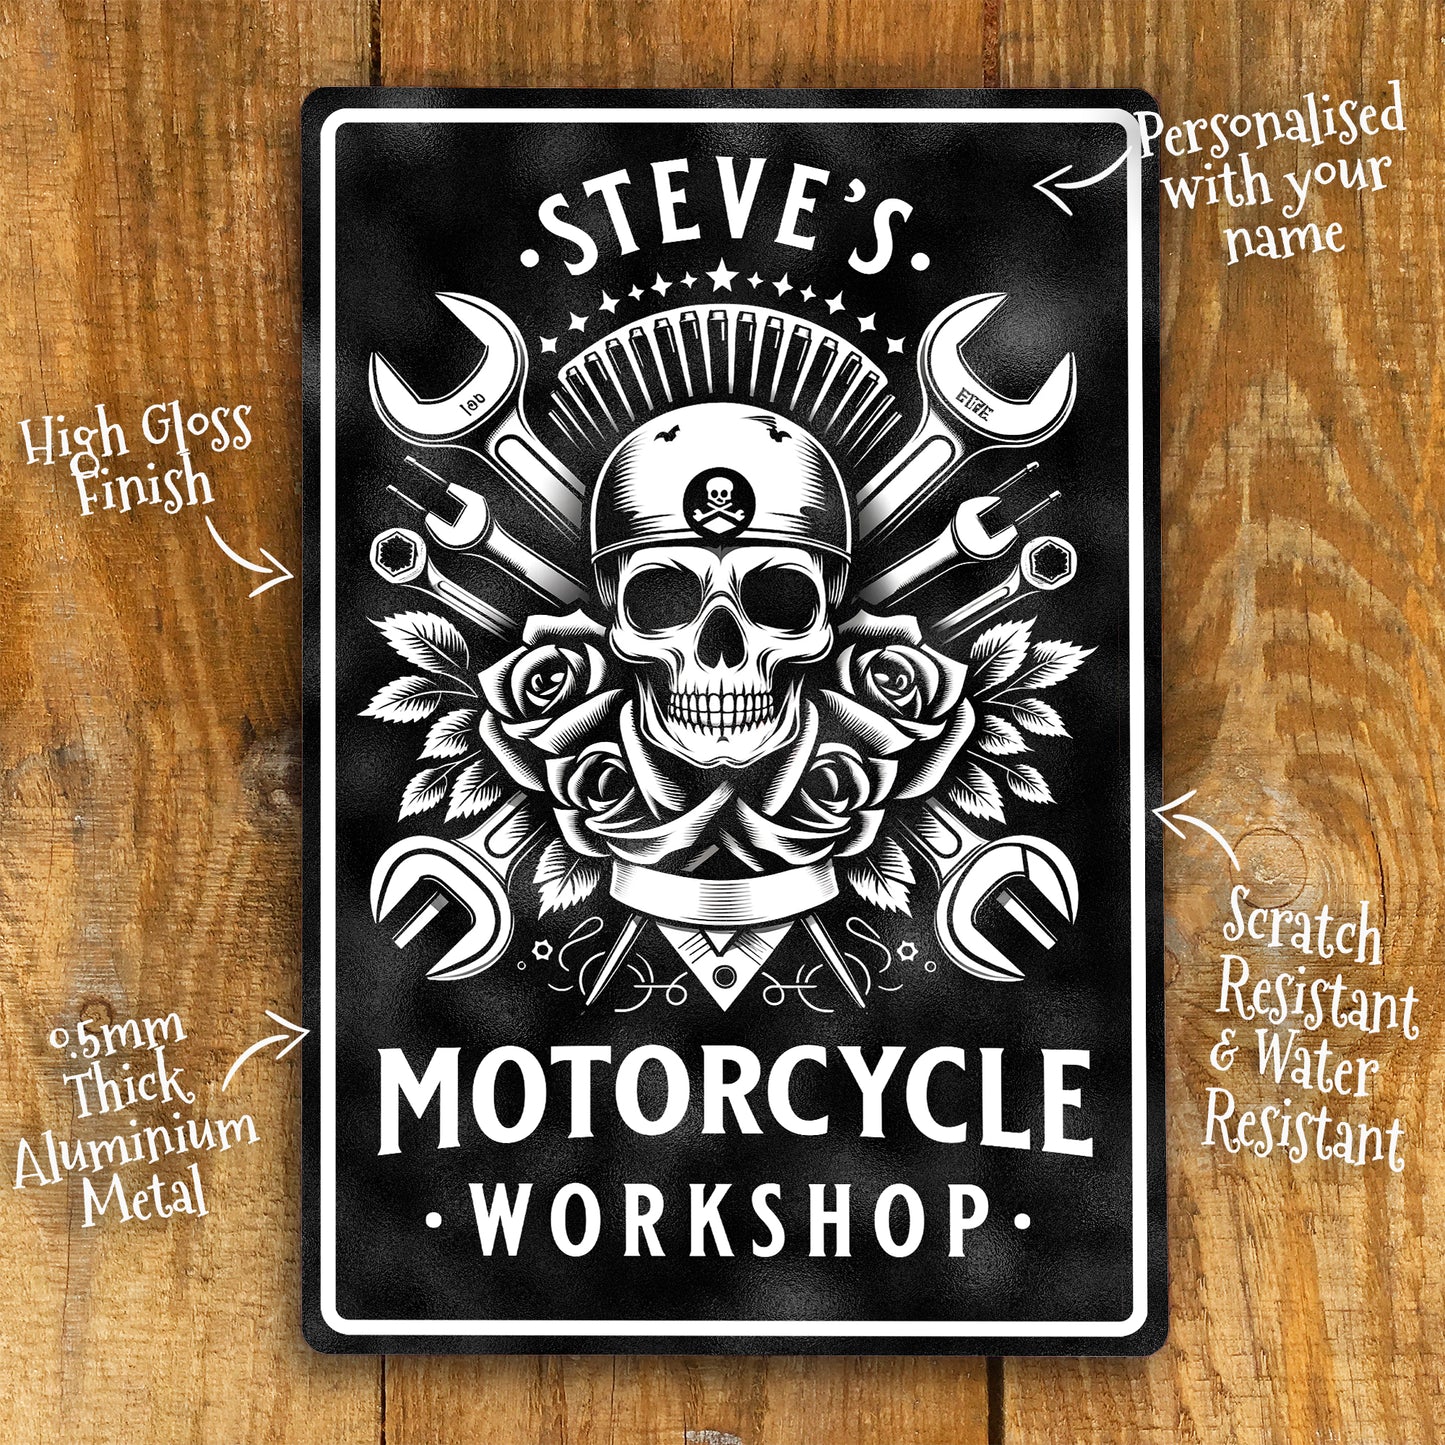 Personalised Motorcycle Workshop Metal Sign depicting skull and crossbones style graphic with mechanics tools details